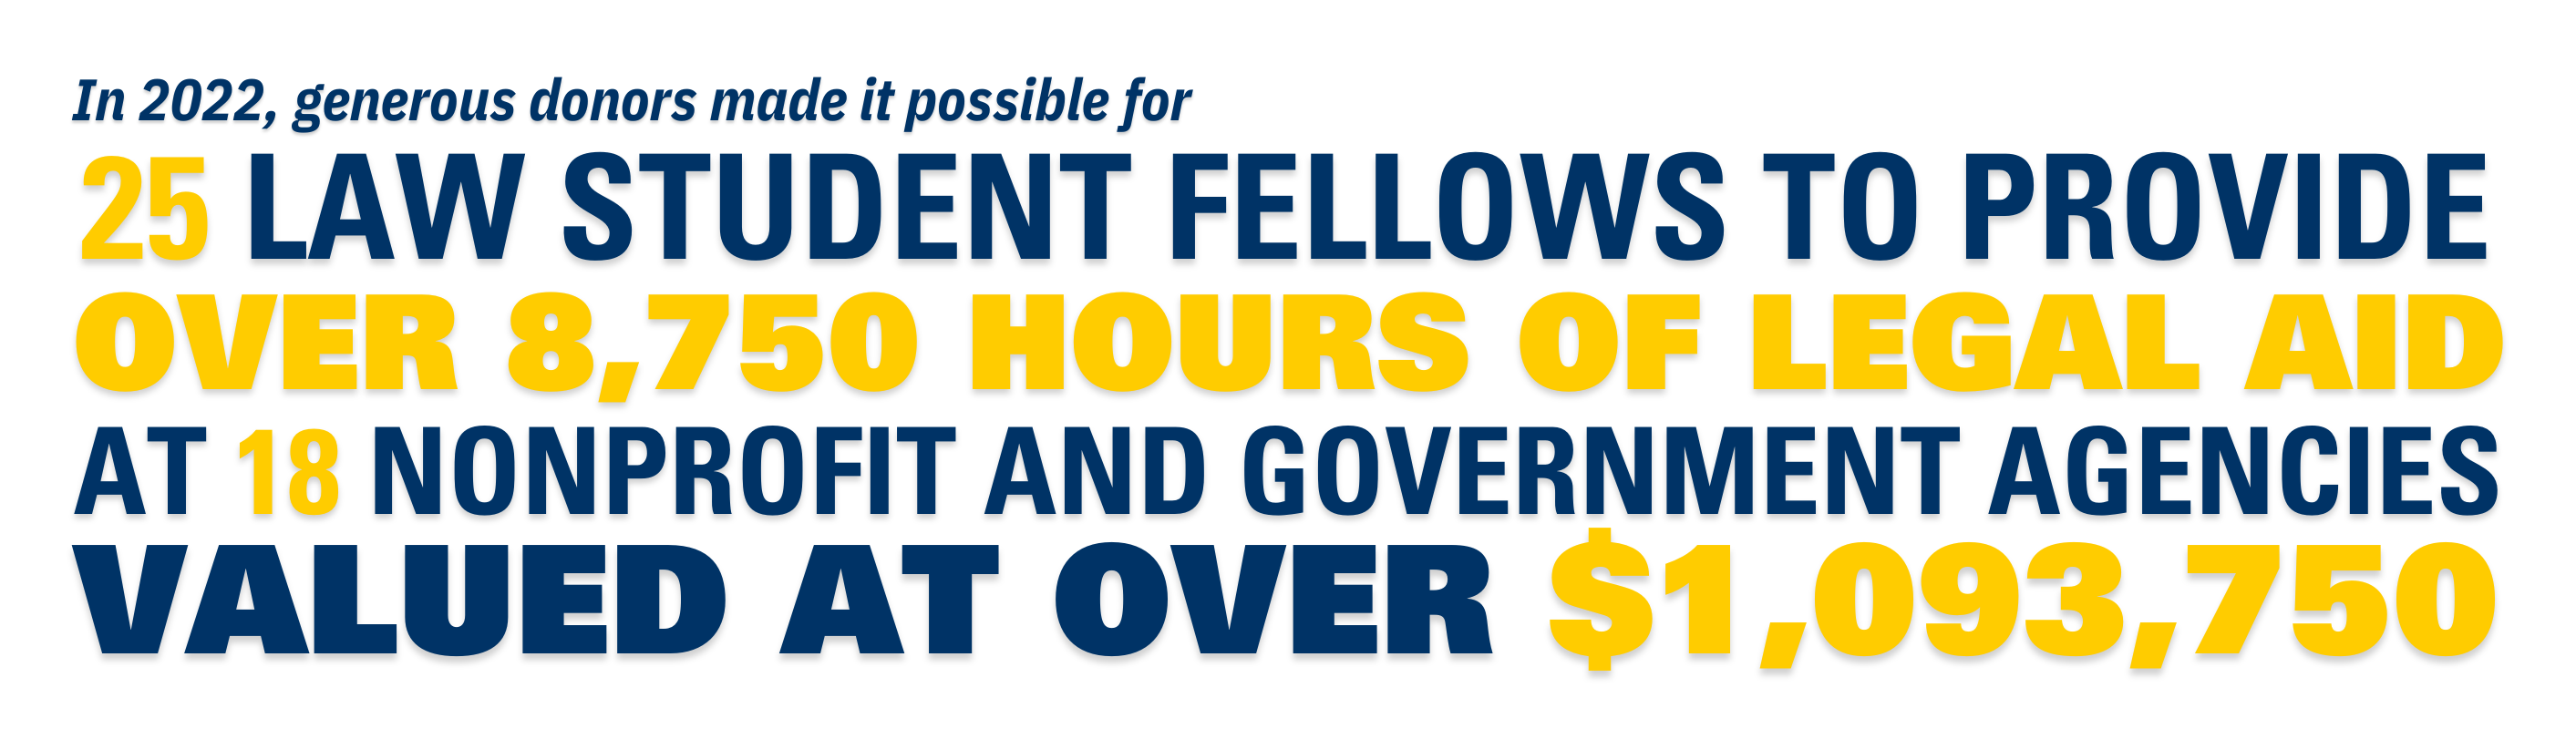 In 2022, generous donors made it possible for:  25 law student fellows to provide  over 8,750 hours of legal aid  at 18 nonprofit and government agencies  valued at over $1,093,750.